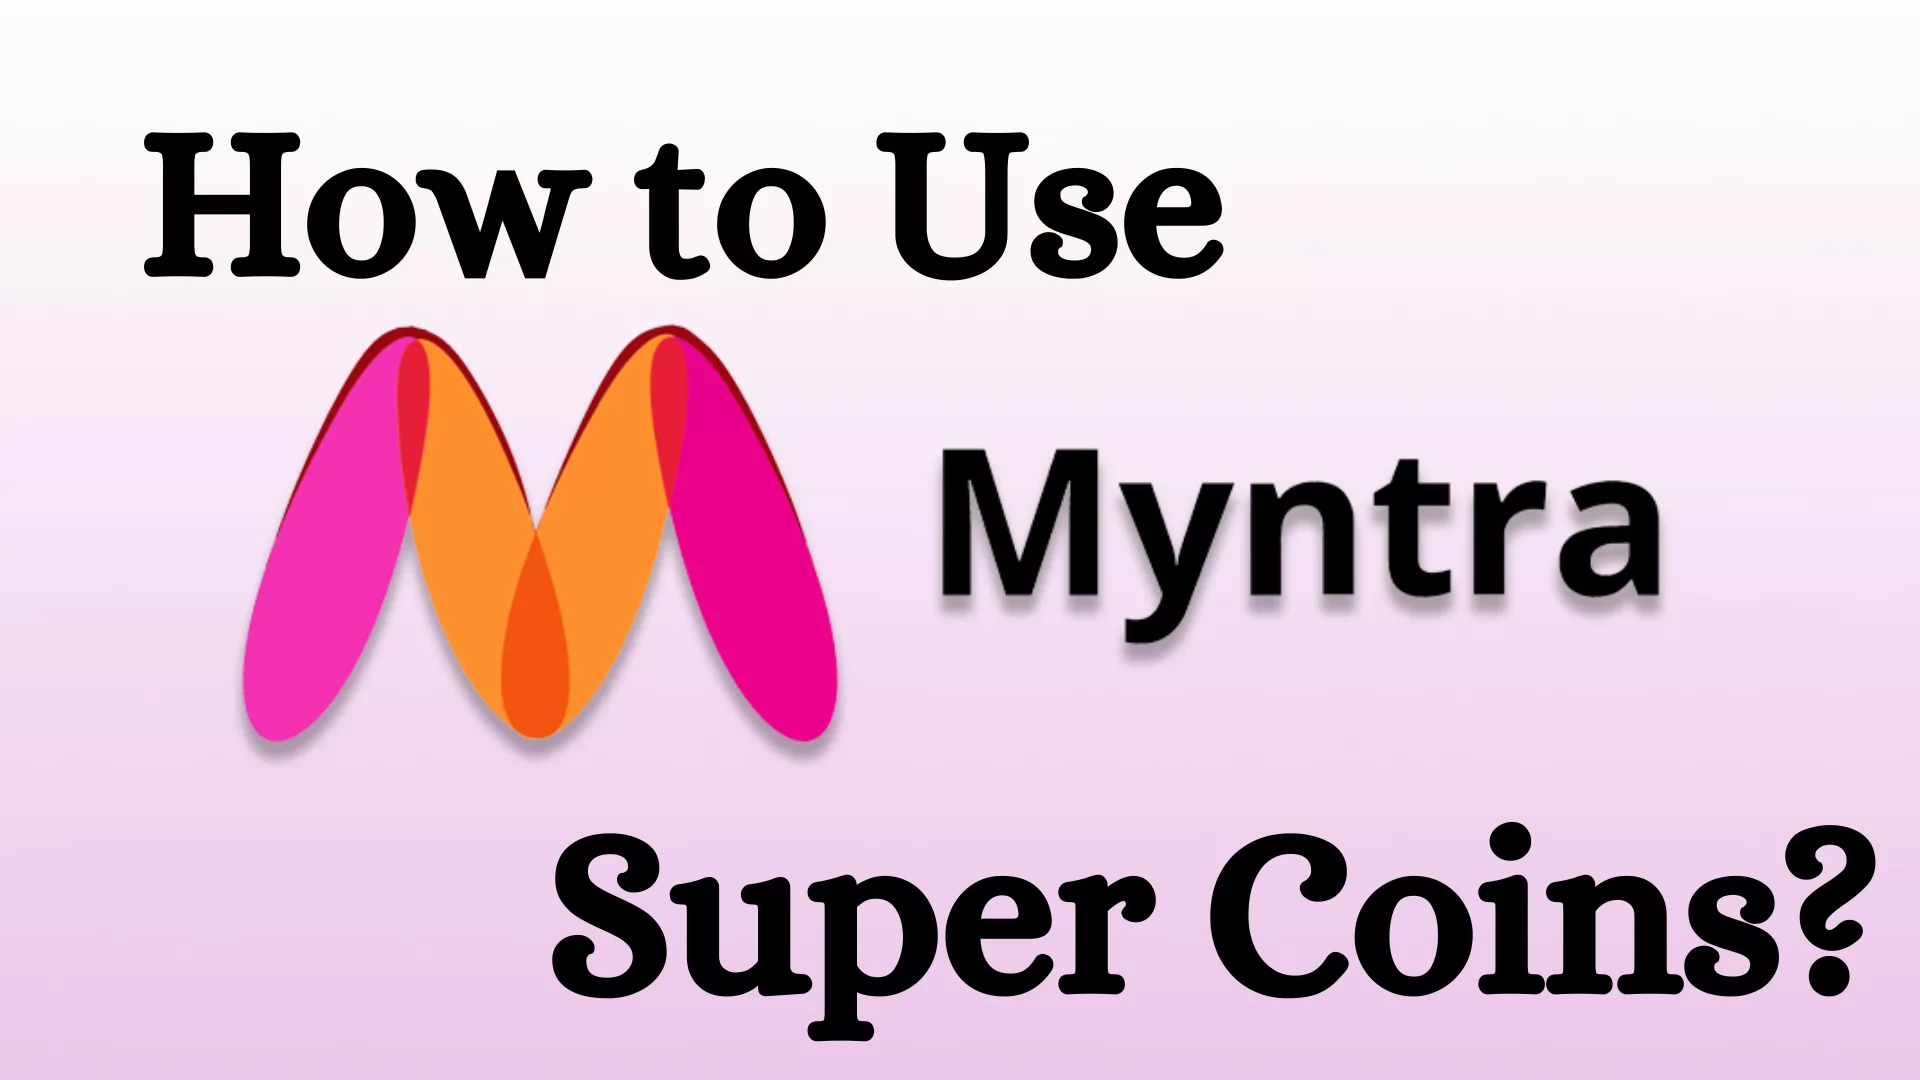 How to Use Myntra Super Coins?